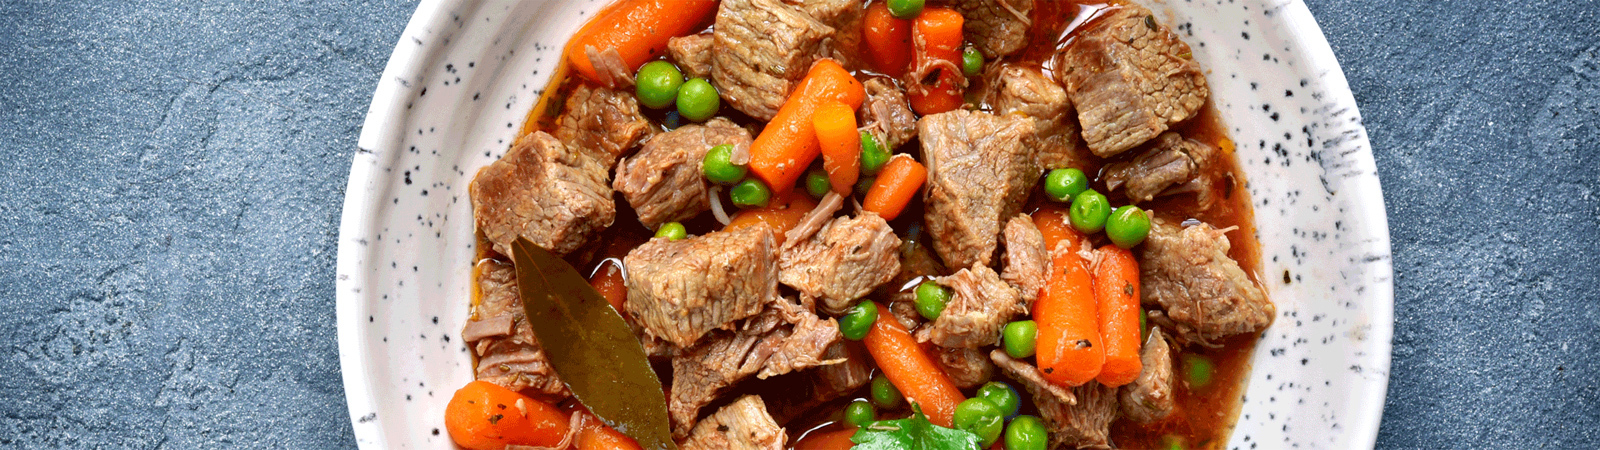 bowl of stew with meat and carrots